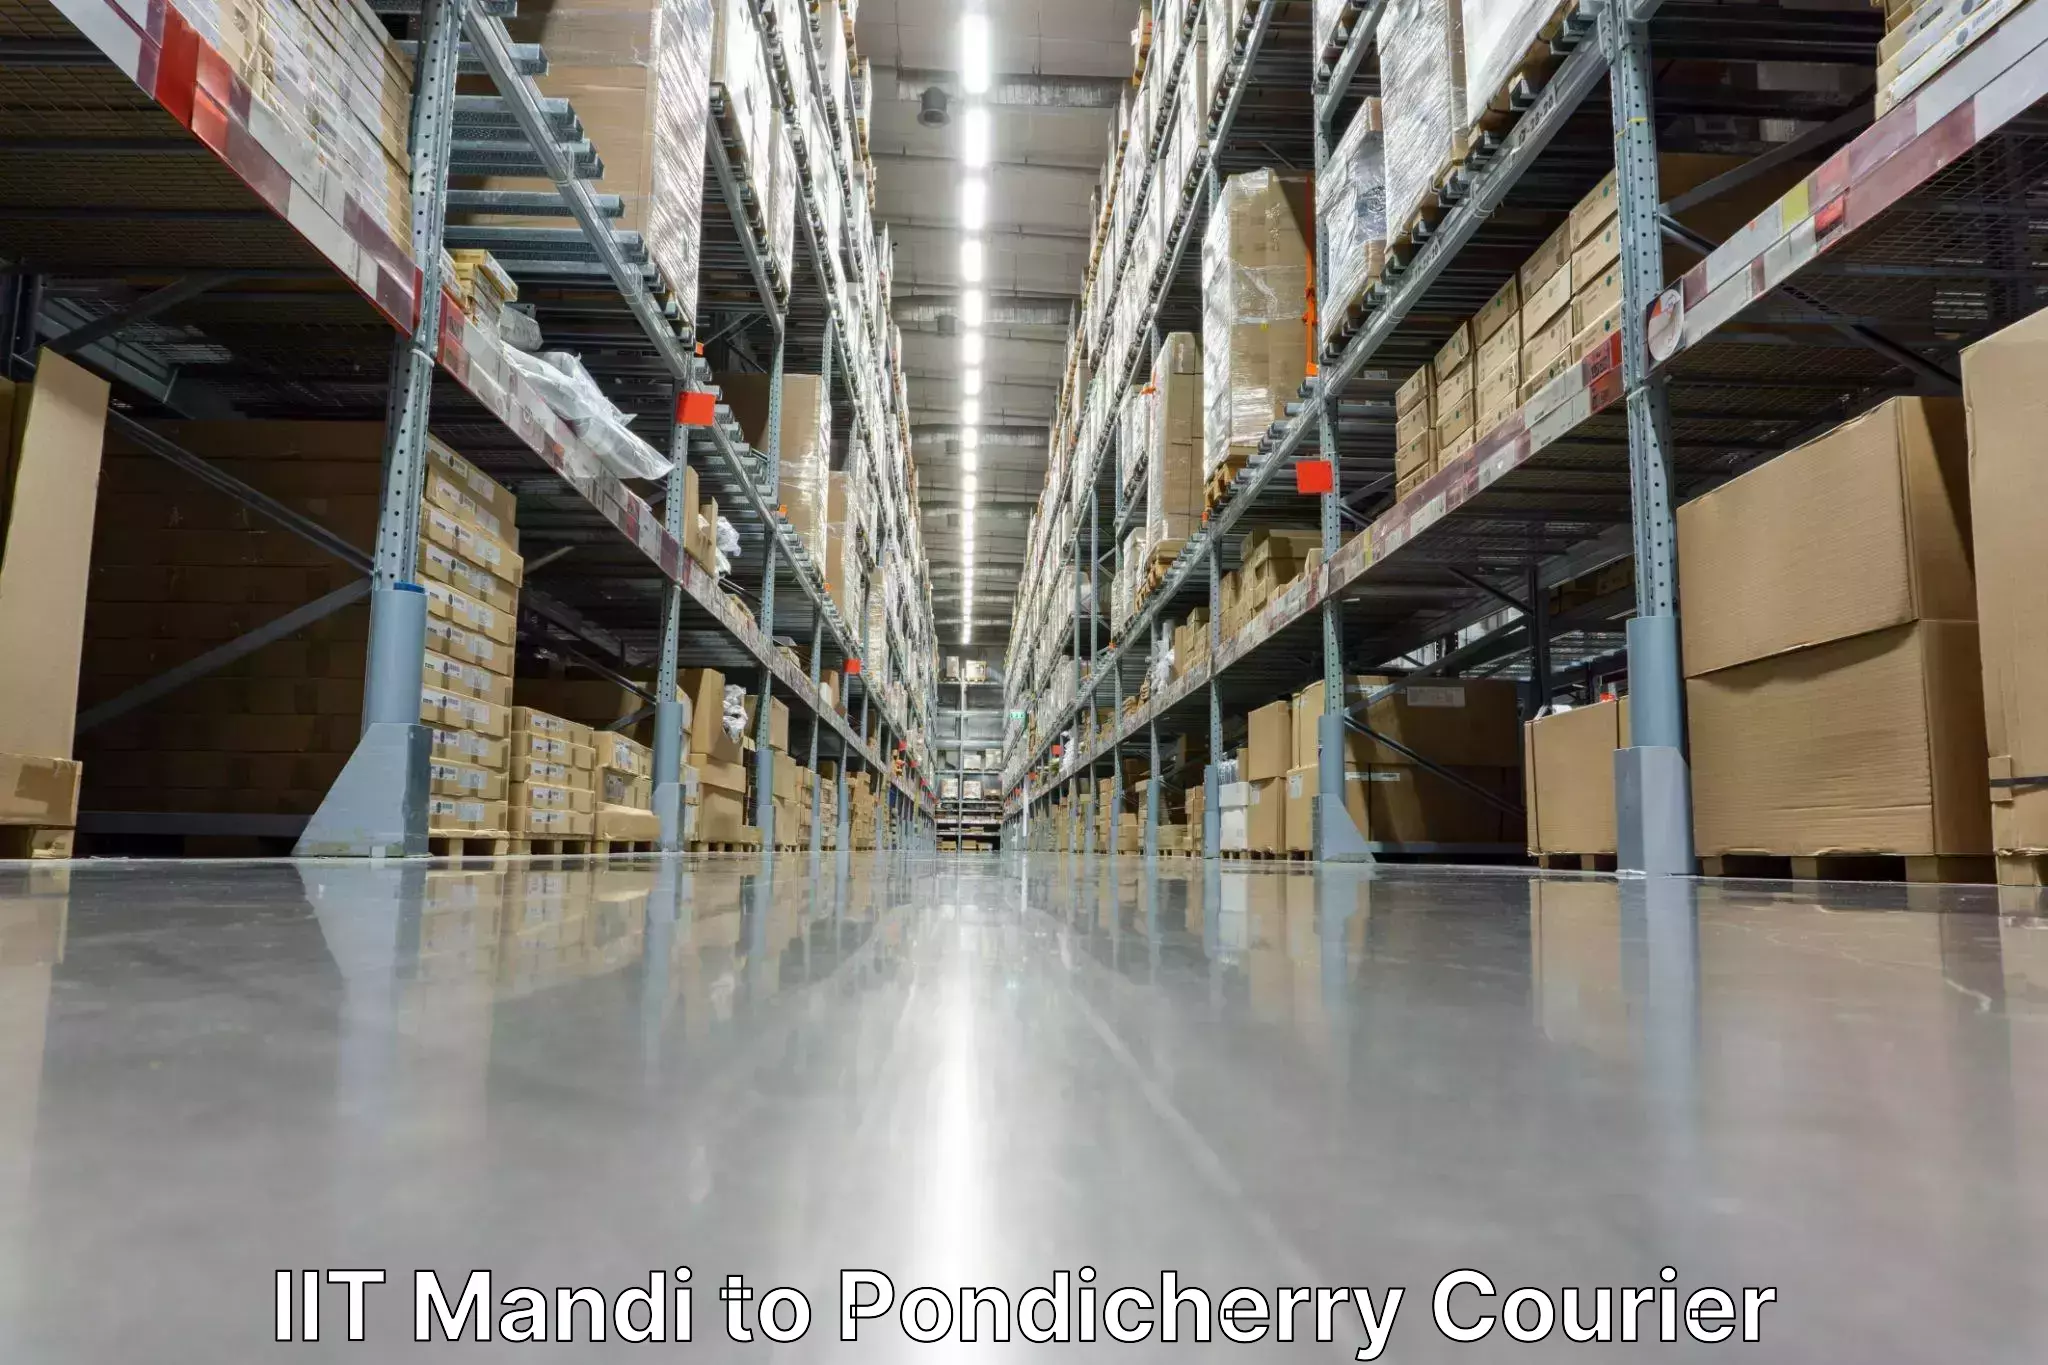 Corporate courier solutions IIT Mandi to Pondicherry